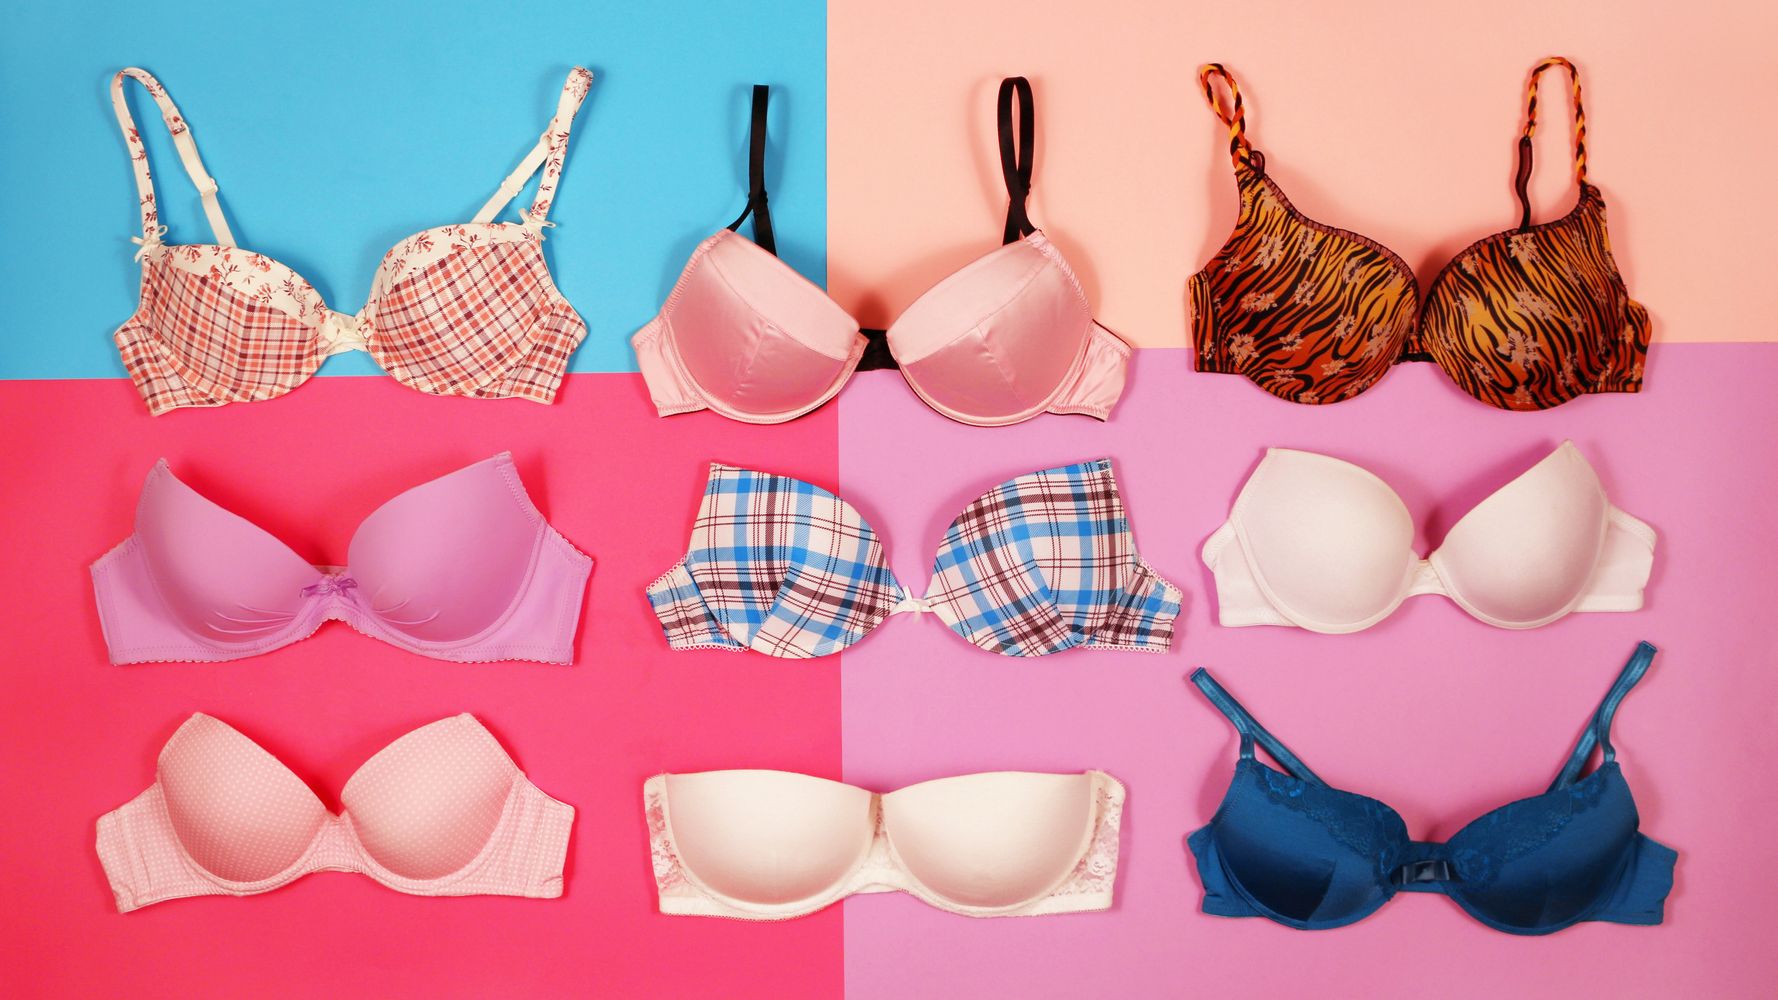 Let's make banded panties - with a little help from a Bra-makers